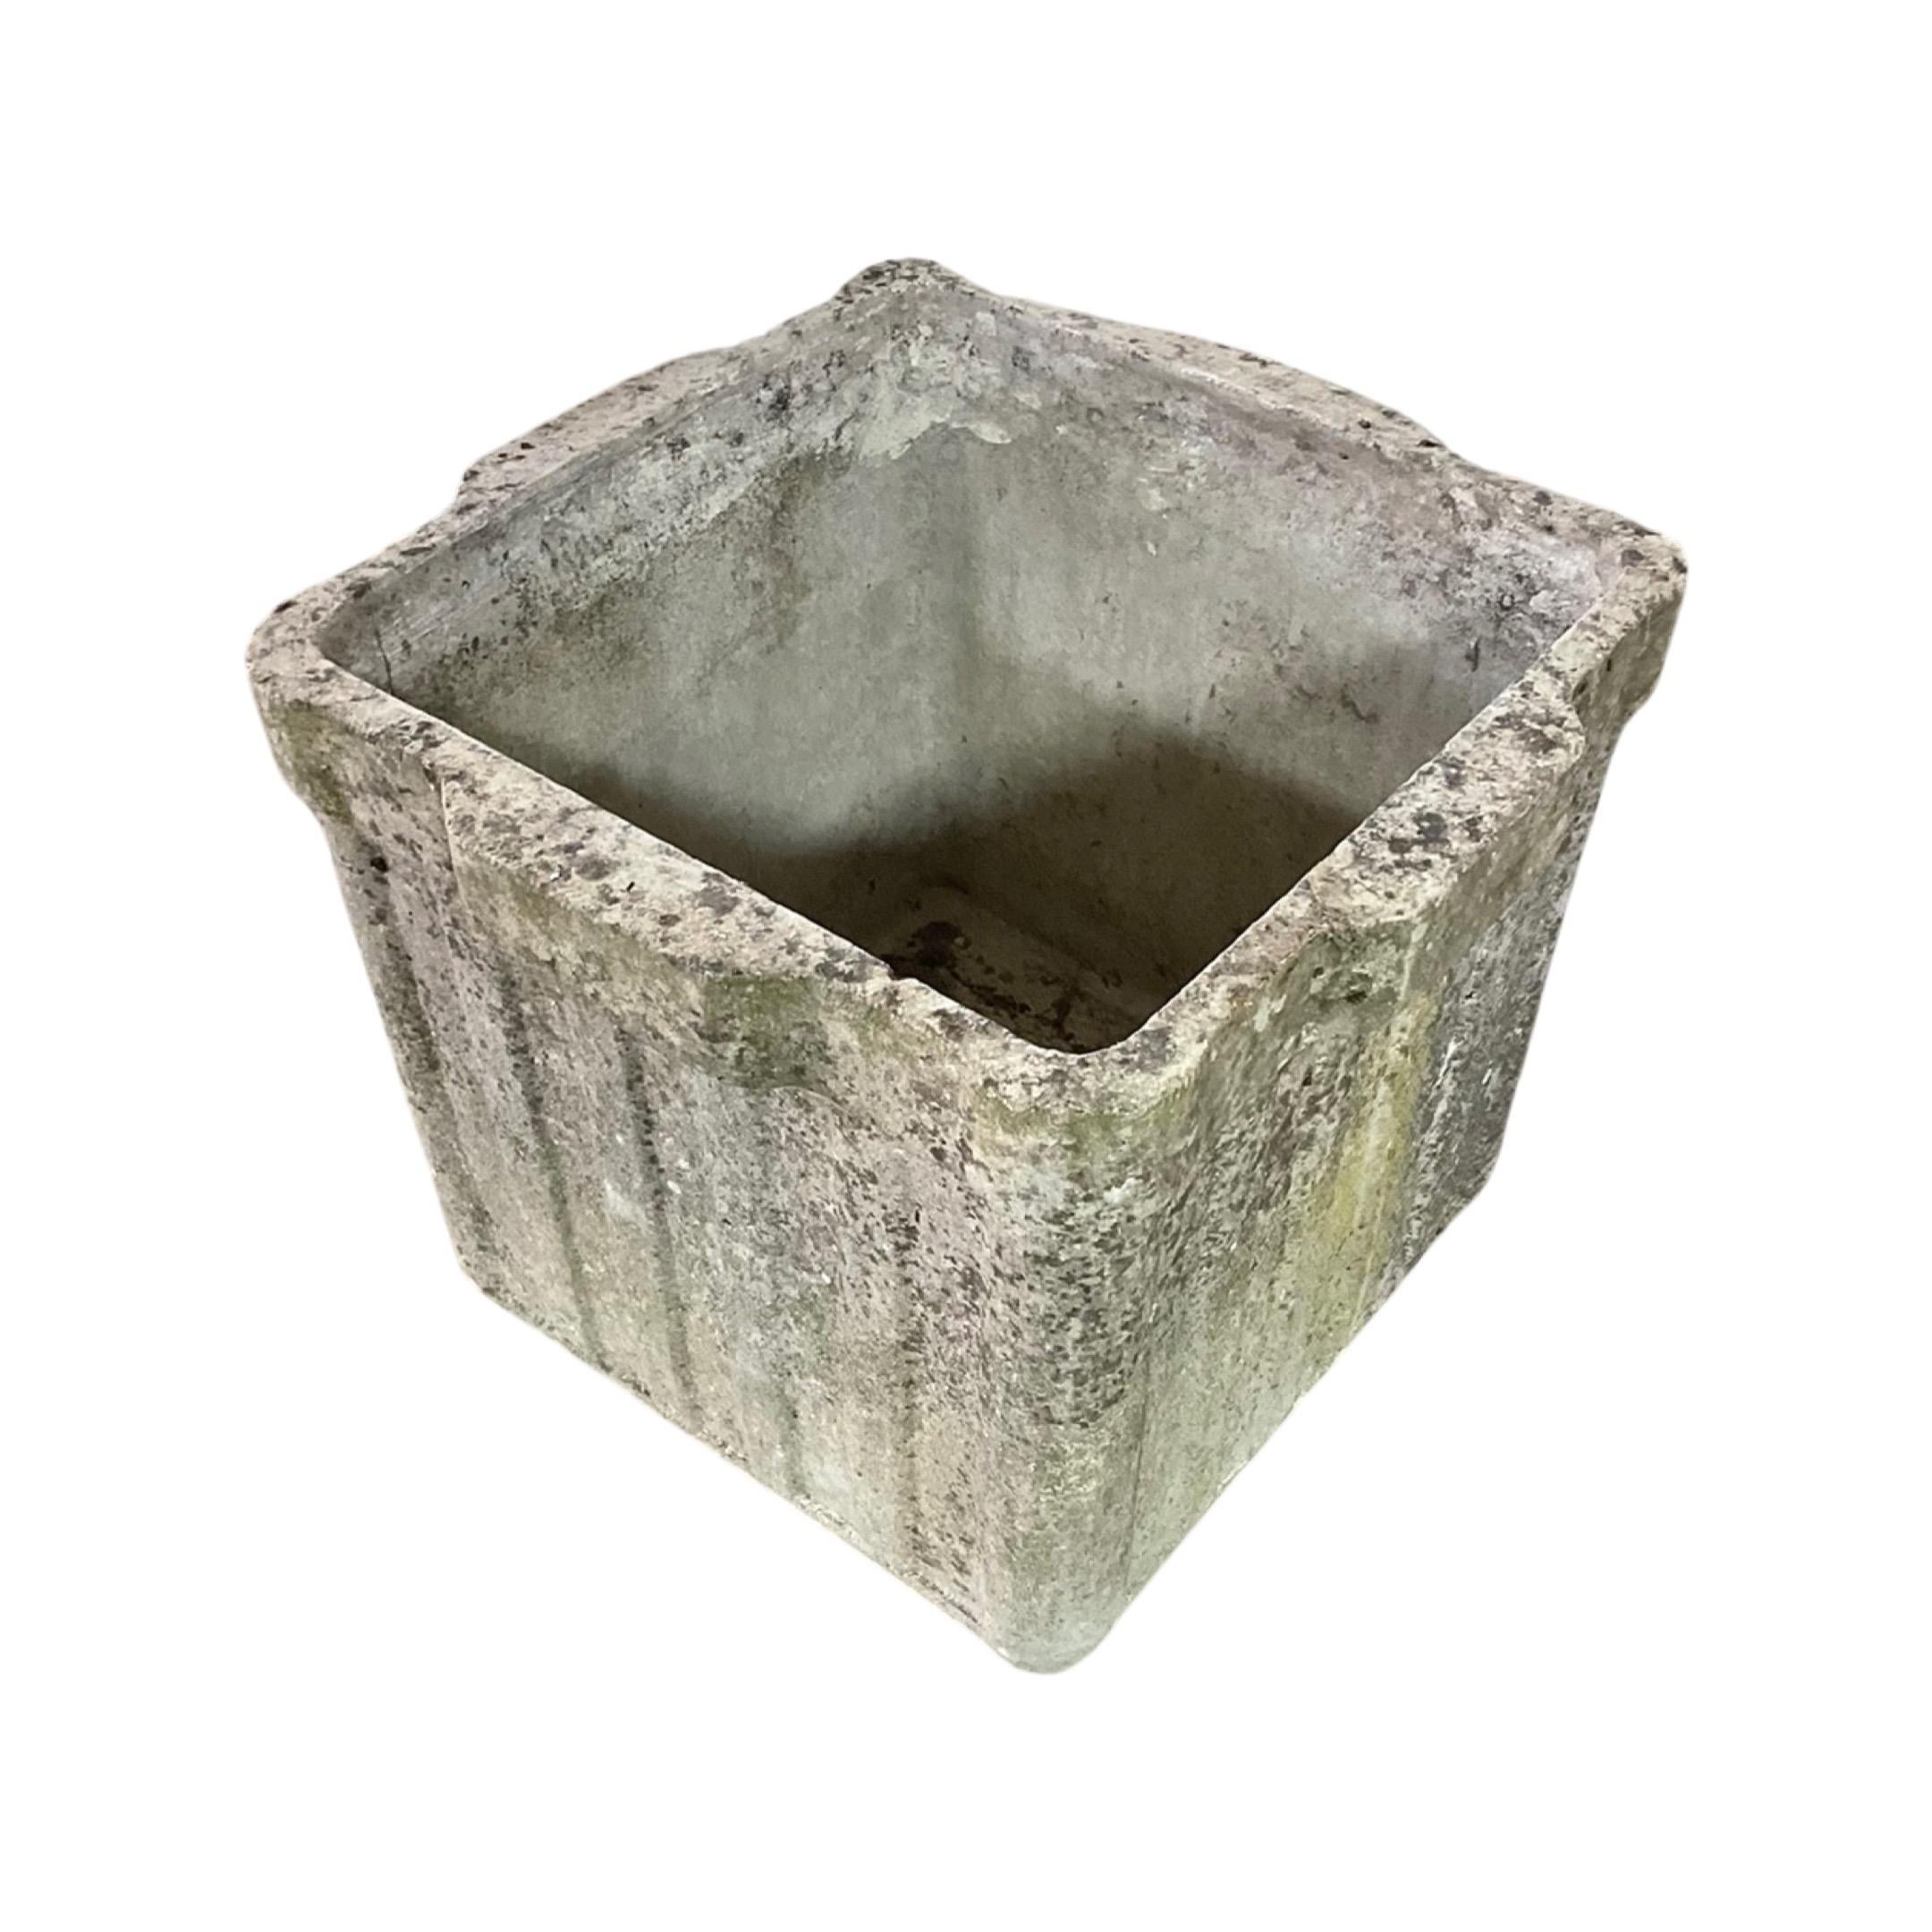 Small square shape planter with ribbed designing along the 4 sides. Made out of a concrete composite. Originates from Switzerland. Circa, 1950's. Designed by Willy Guhl.